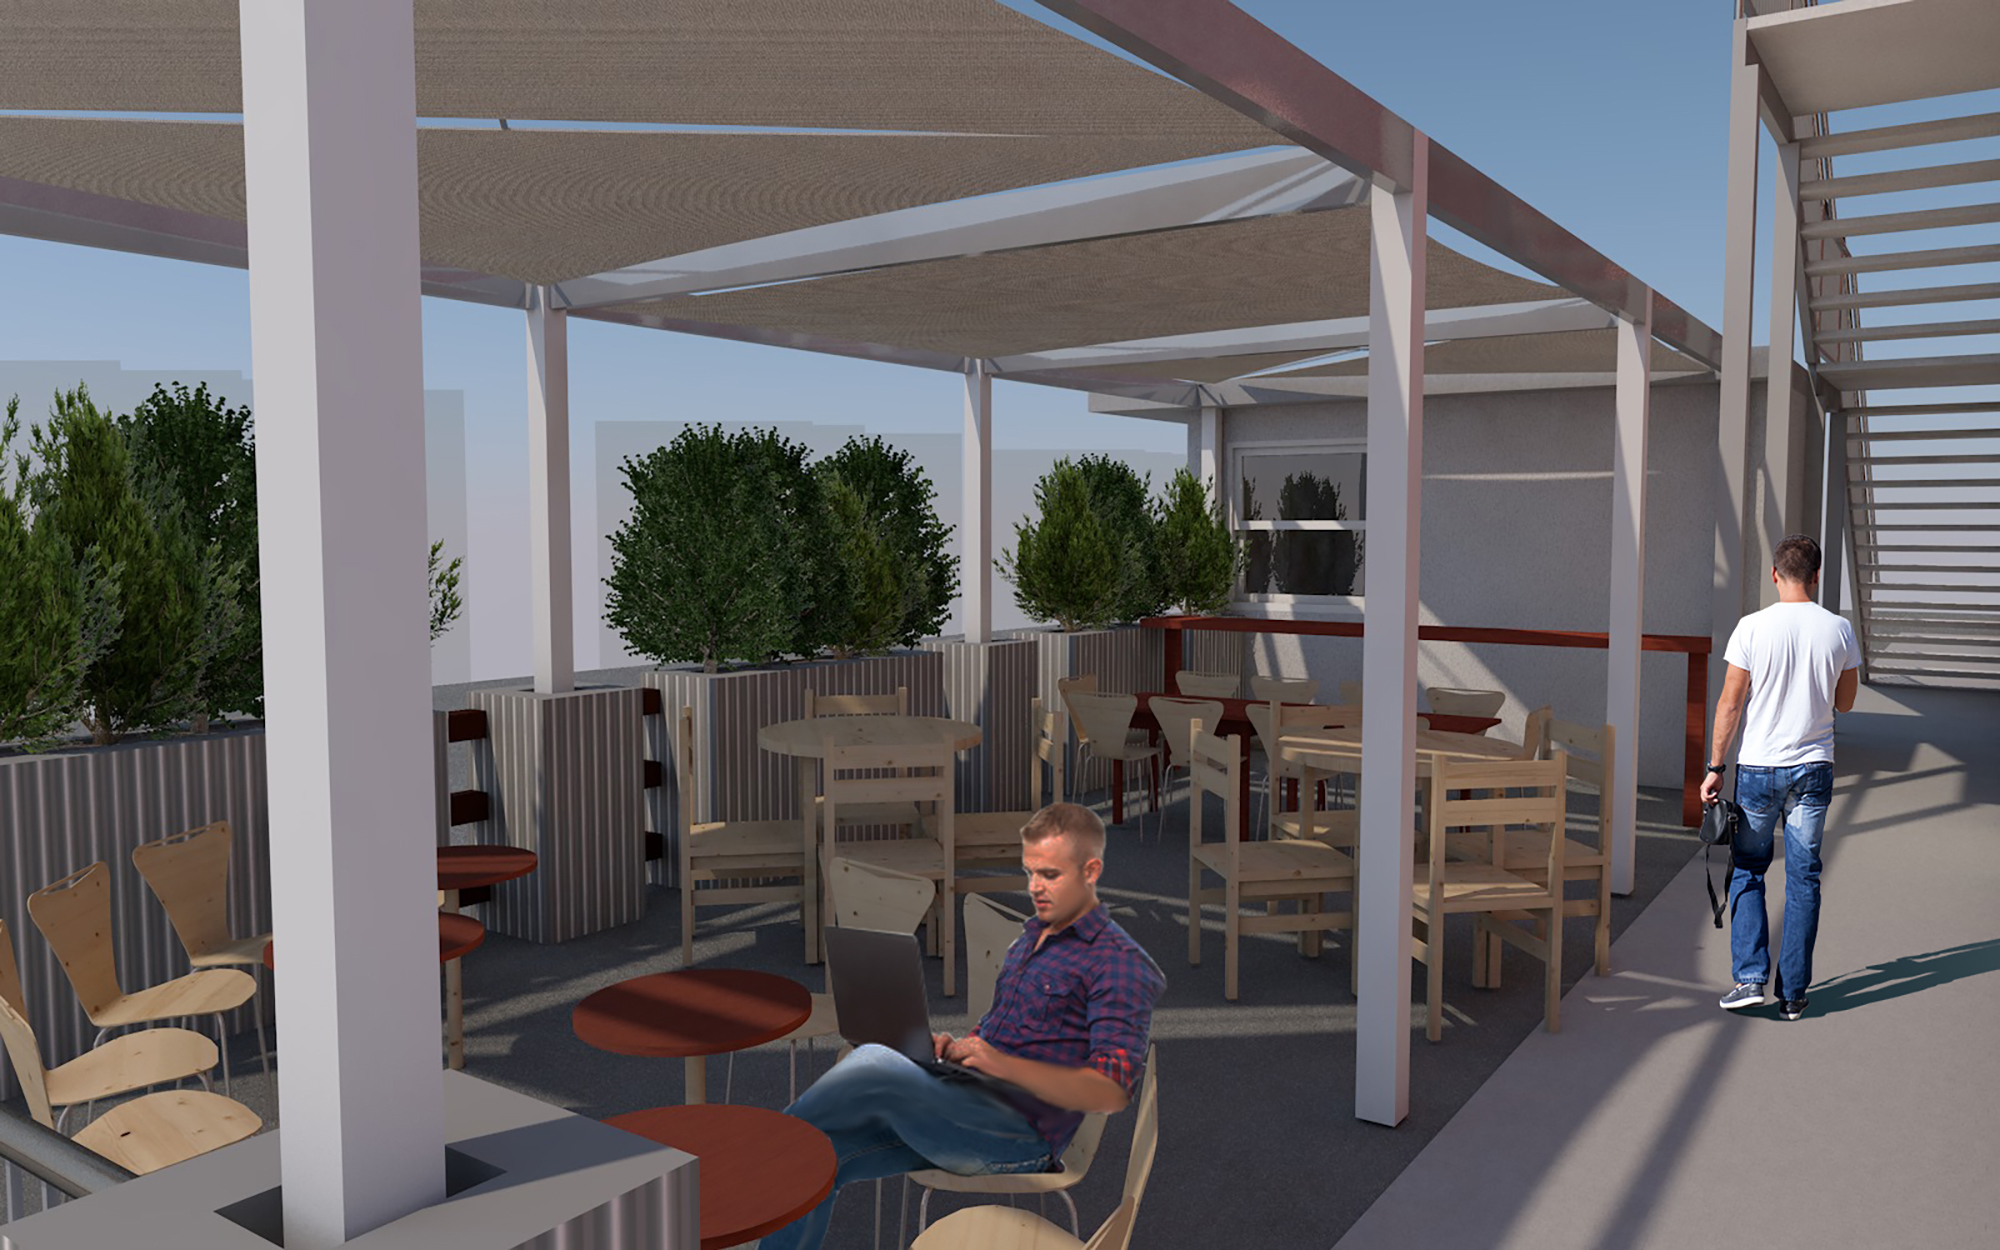 A 440-square-foot outdoor beer garden will be added to the east side of the building, according to project renderings.